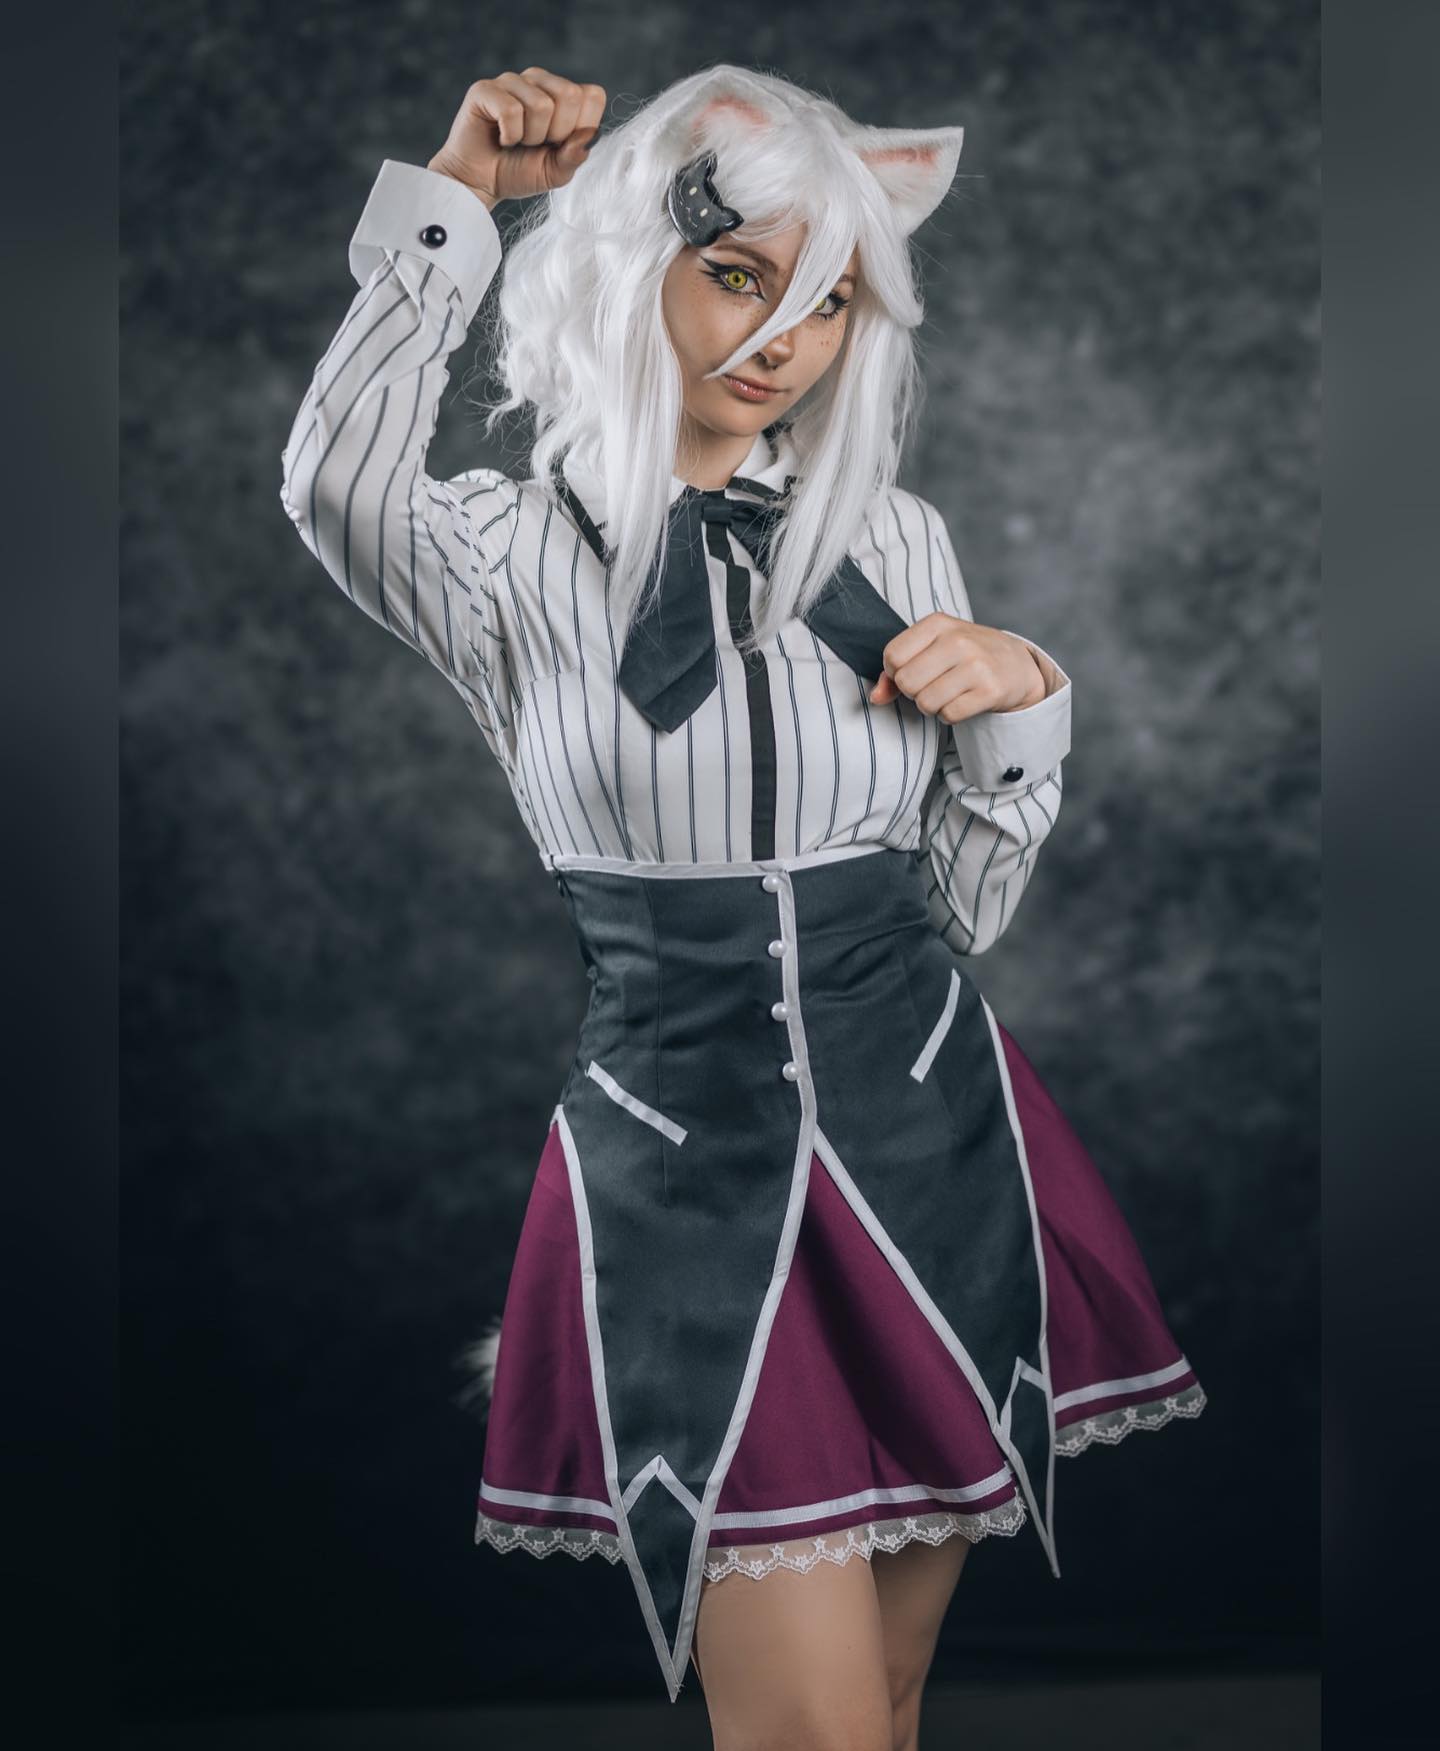 nya :3
-
koneko tojo at the @polarisconvention ! me and @pinkteddy.cos decided to cosplay from highschool dxd (even though the anime is as old as my great grandpa) and it was soo fun :3 
-
pictures taken by @eosandy_ !🫶
-
#cosplay #cosplayer #cosplaying #cosplaygirl #highschooldxd #hdxd #highschooldxdedit #highschooldxdcosplay #koneko #konekotojo #konekocosplay #rias #riasgremory #riasgremorycosplay #riascosplay #anime #animecosplay #mangacosplay #viral